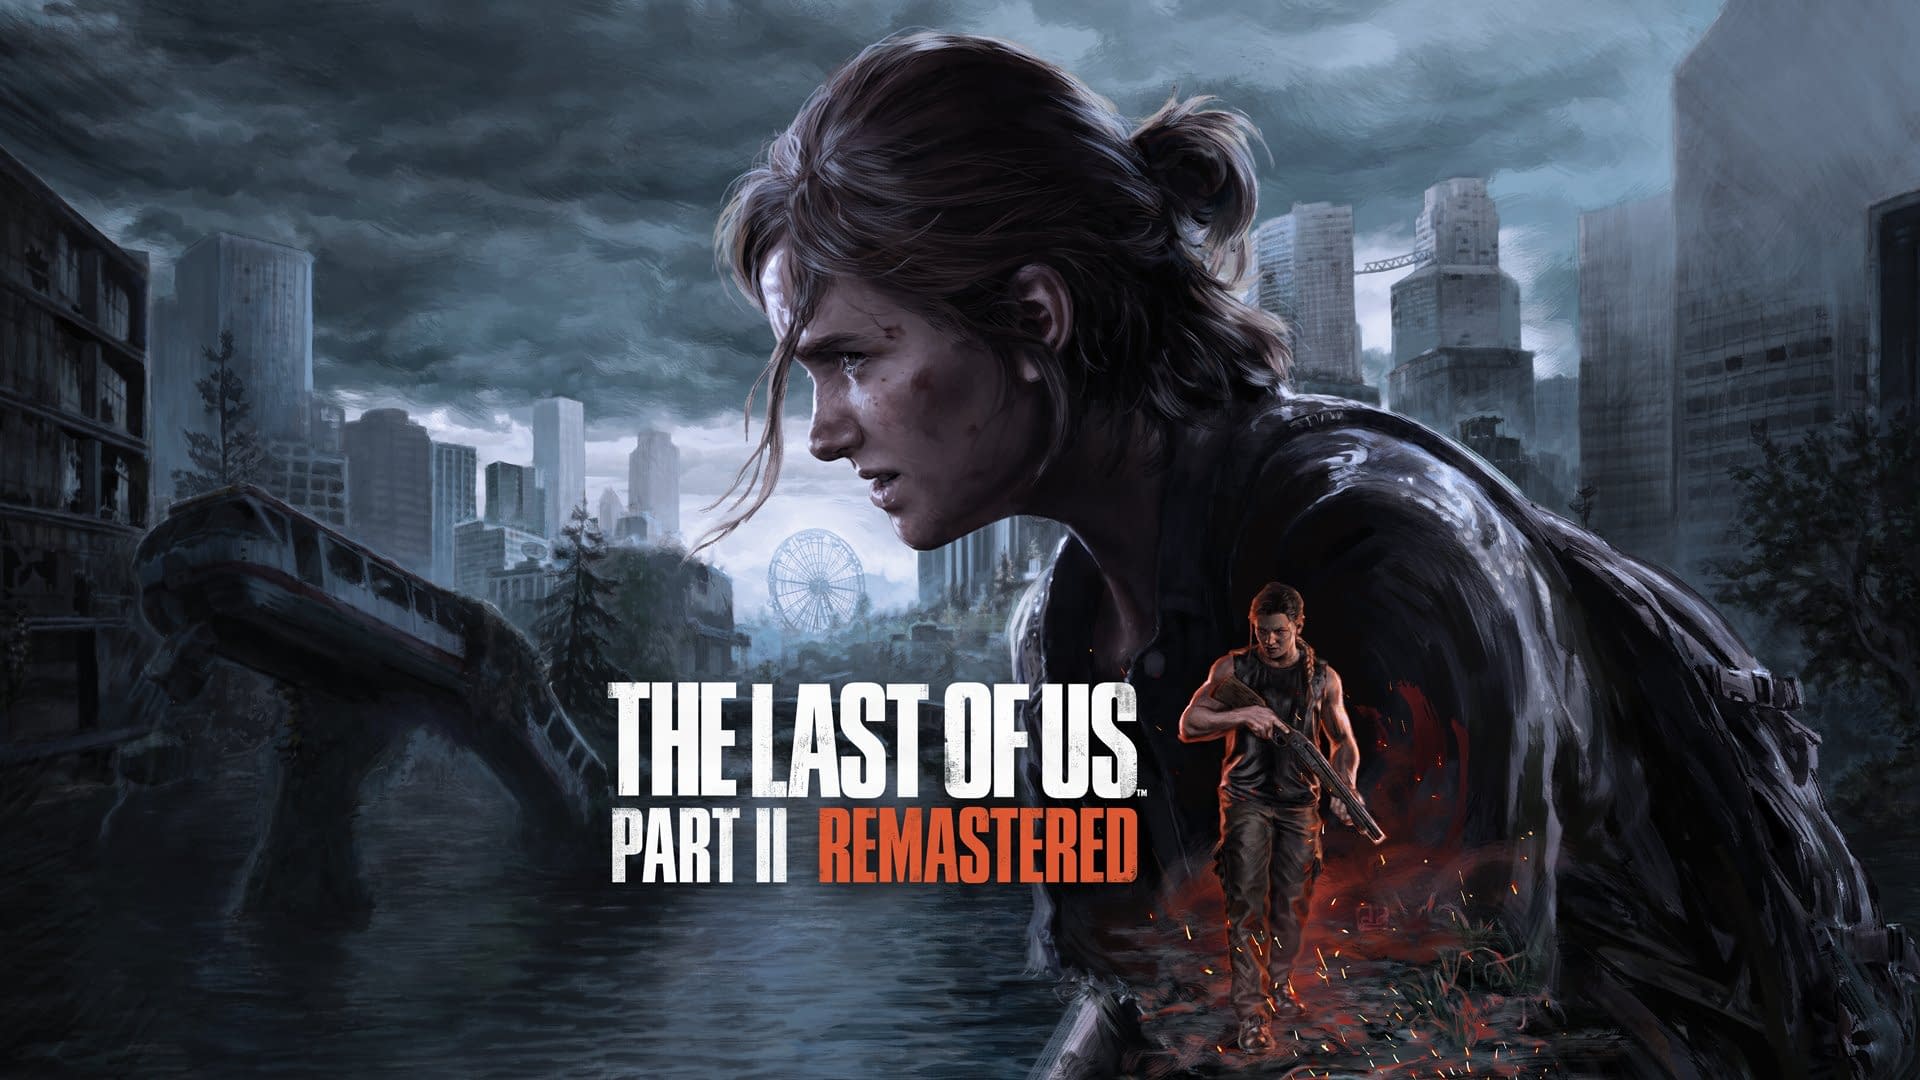 The Last of Us Part II Remastered PS5 Announced: Released Date Announced